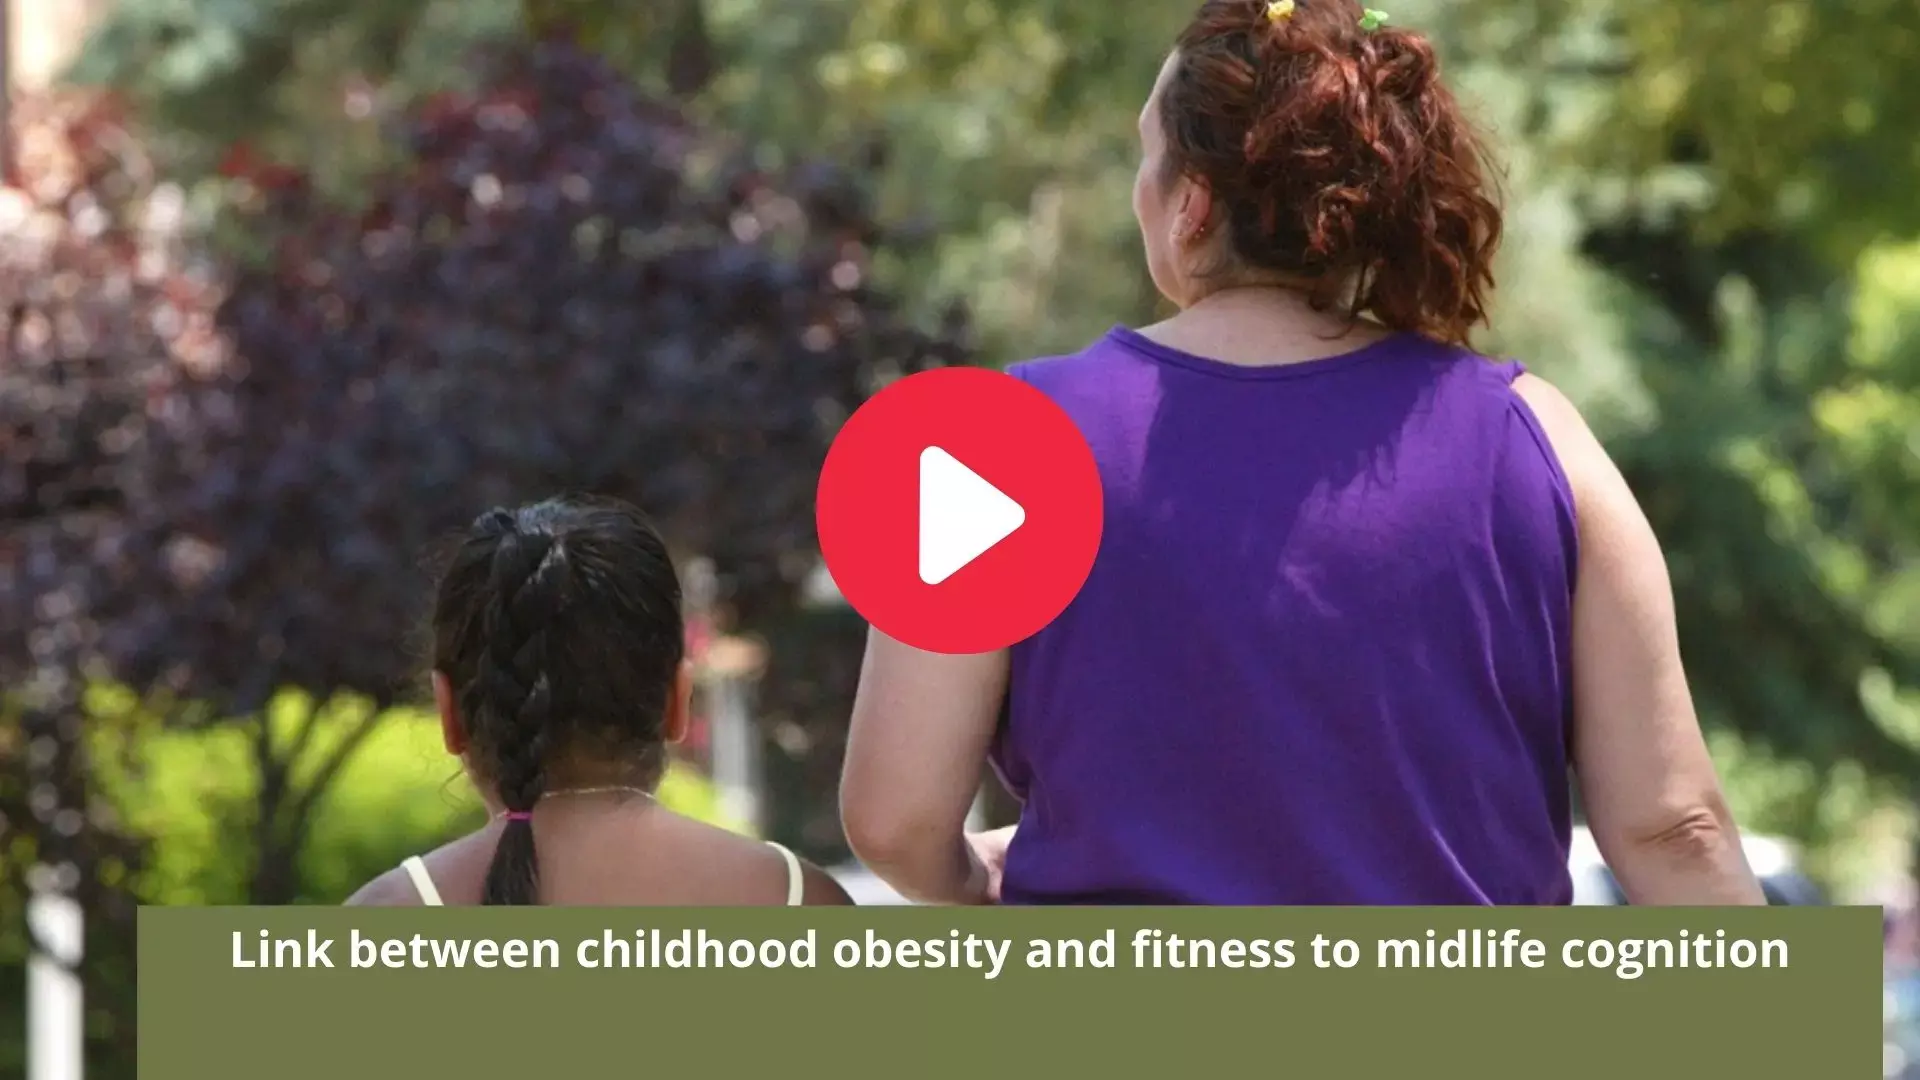 Link between childhood obesity and fitness to midlife cognition